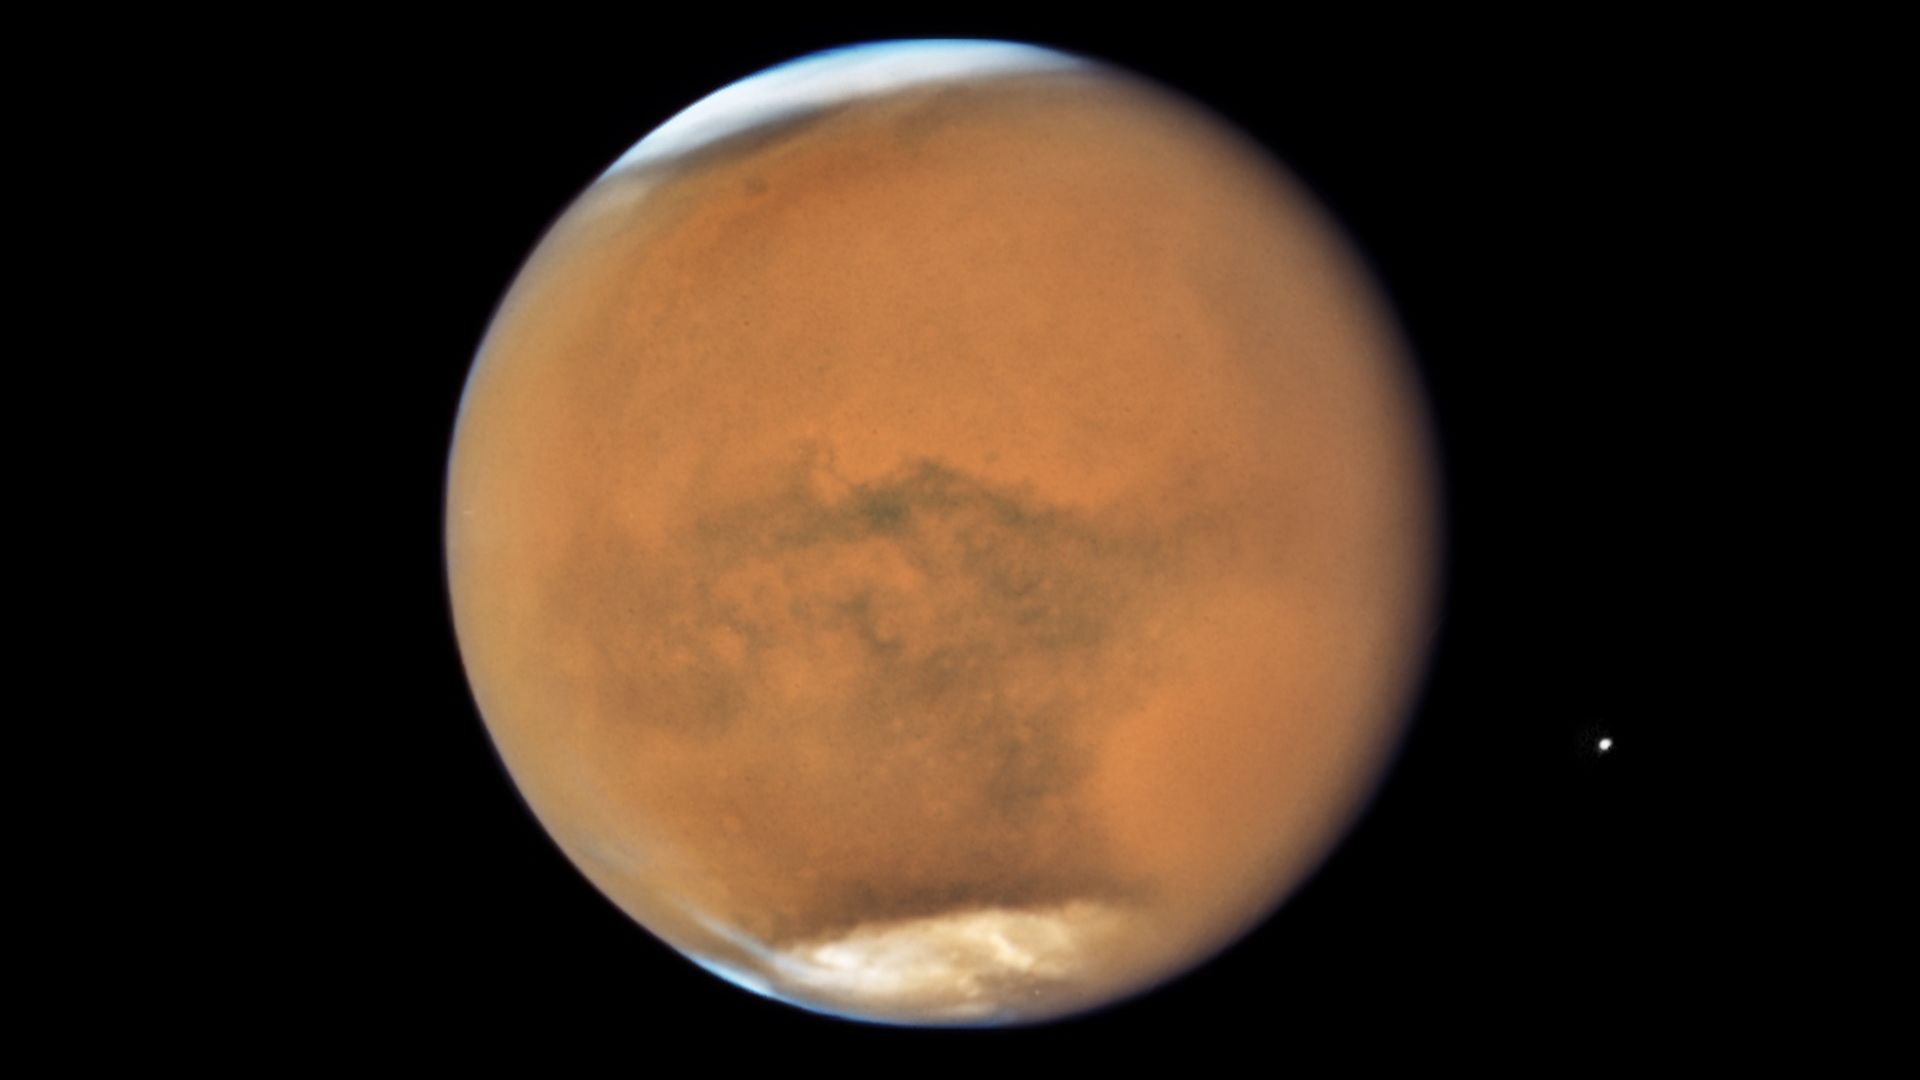 Mars as seen by the Hubble Space Telescope.